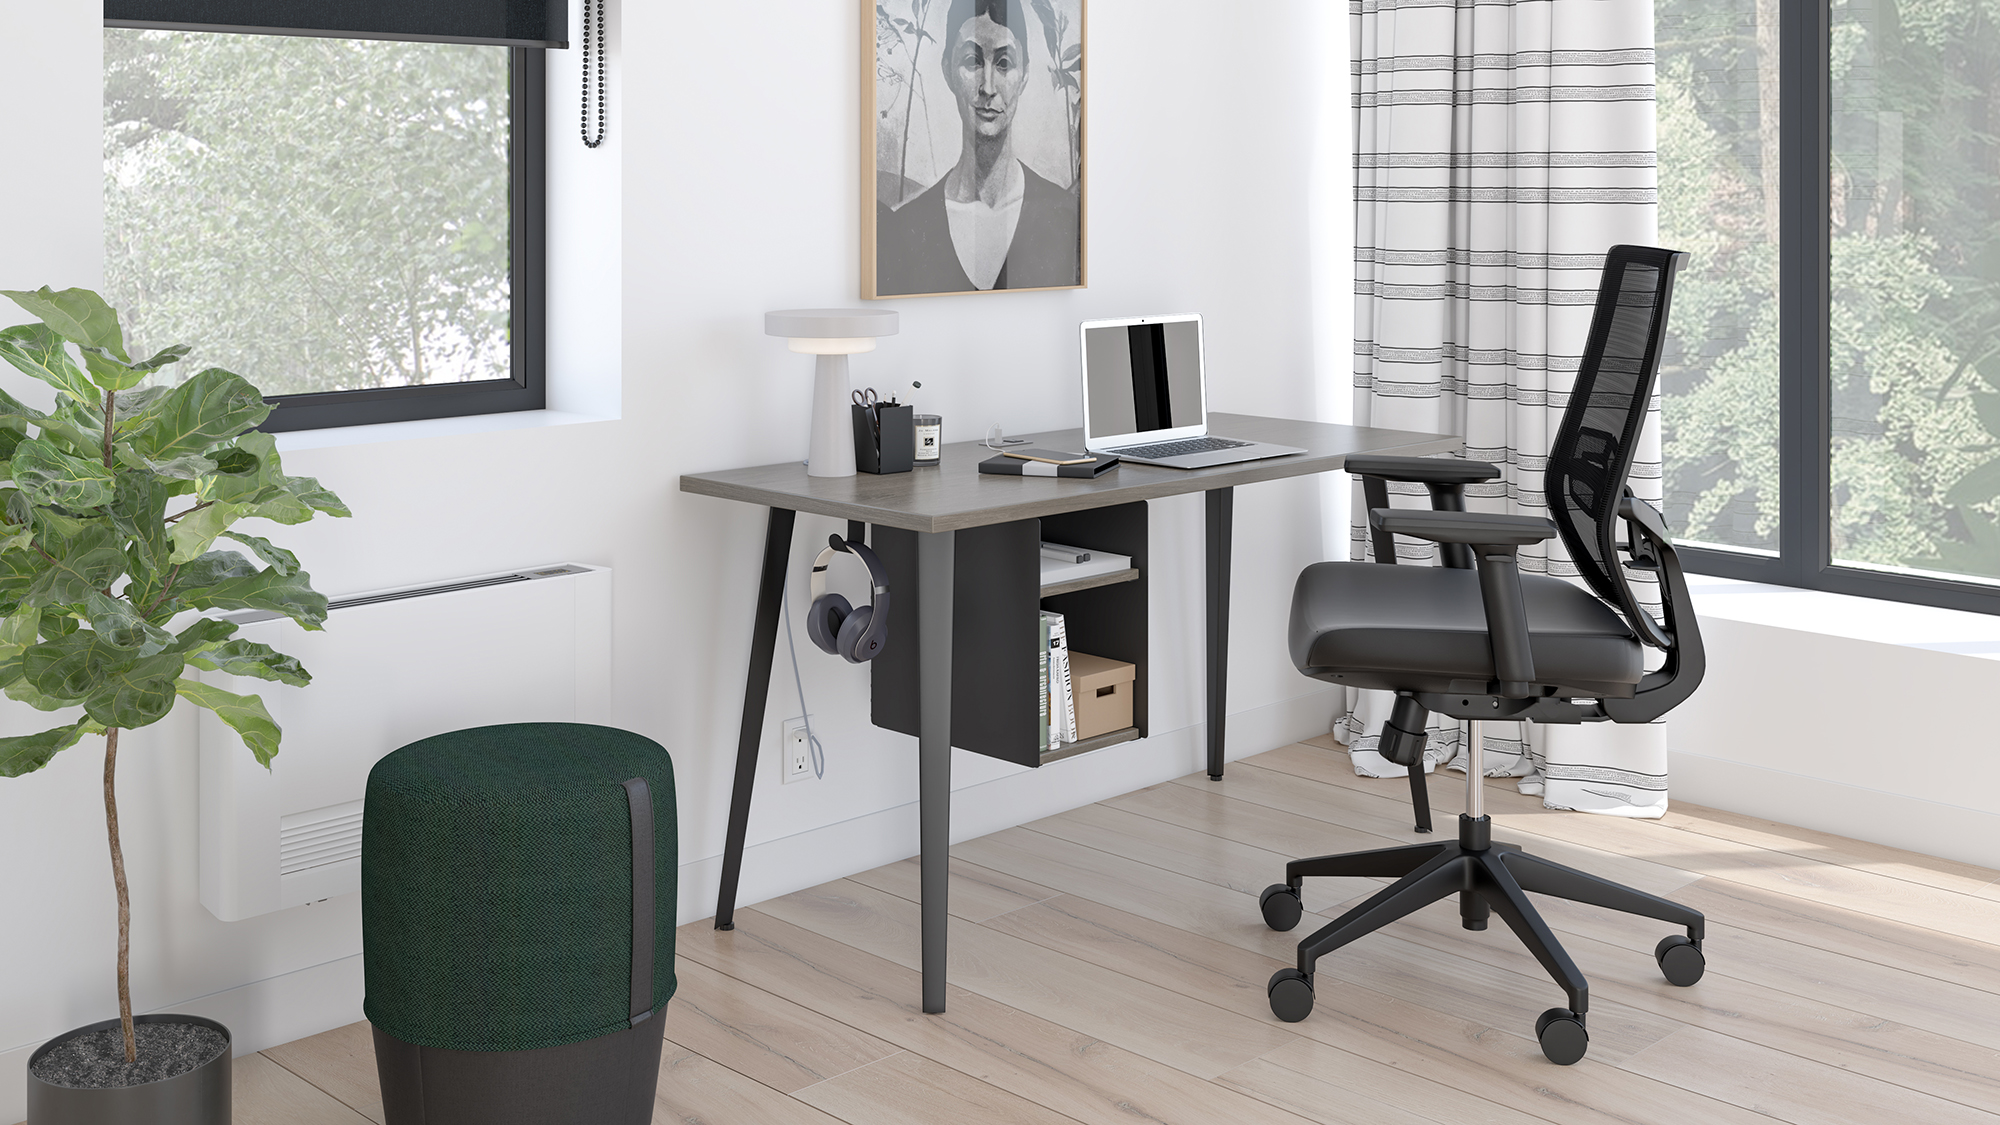 Stad - Home Office Furniture | Office Furniture | Lacasse